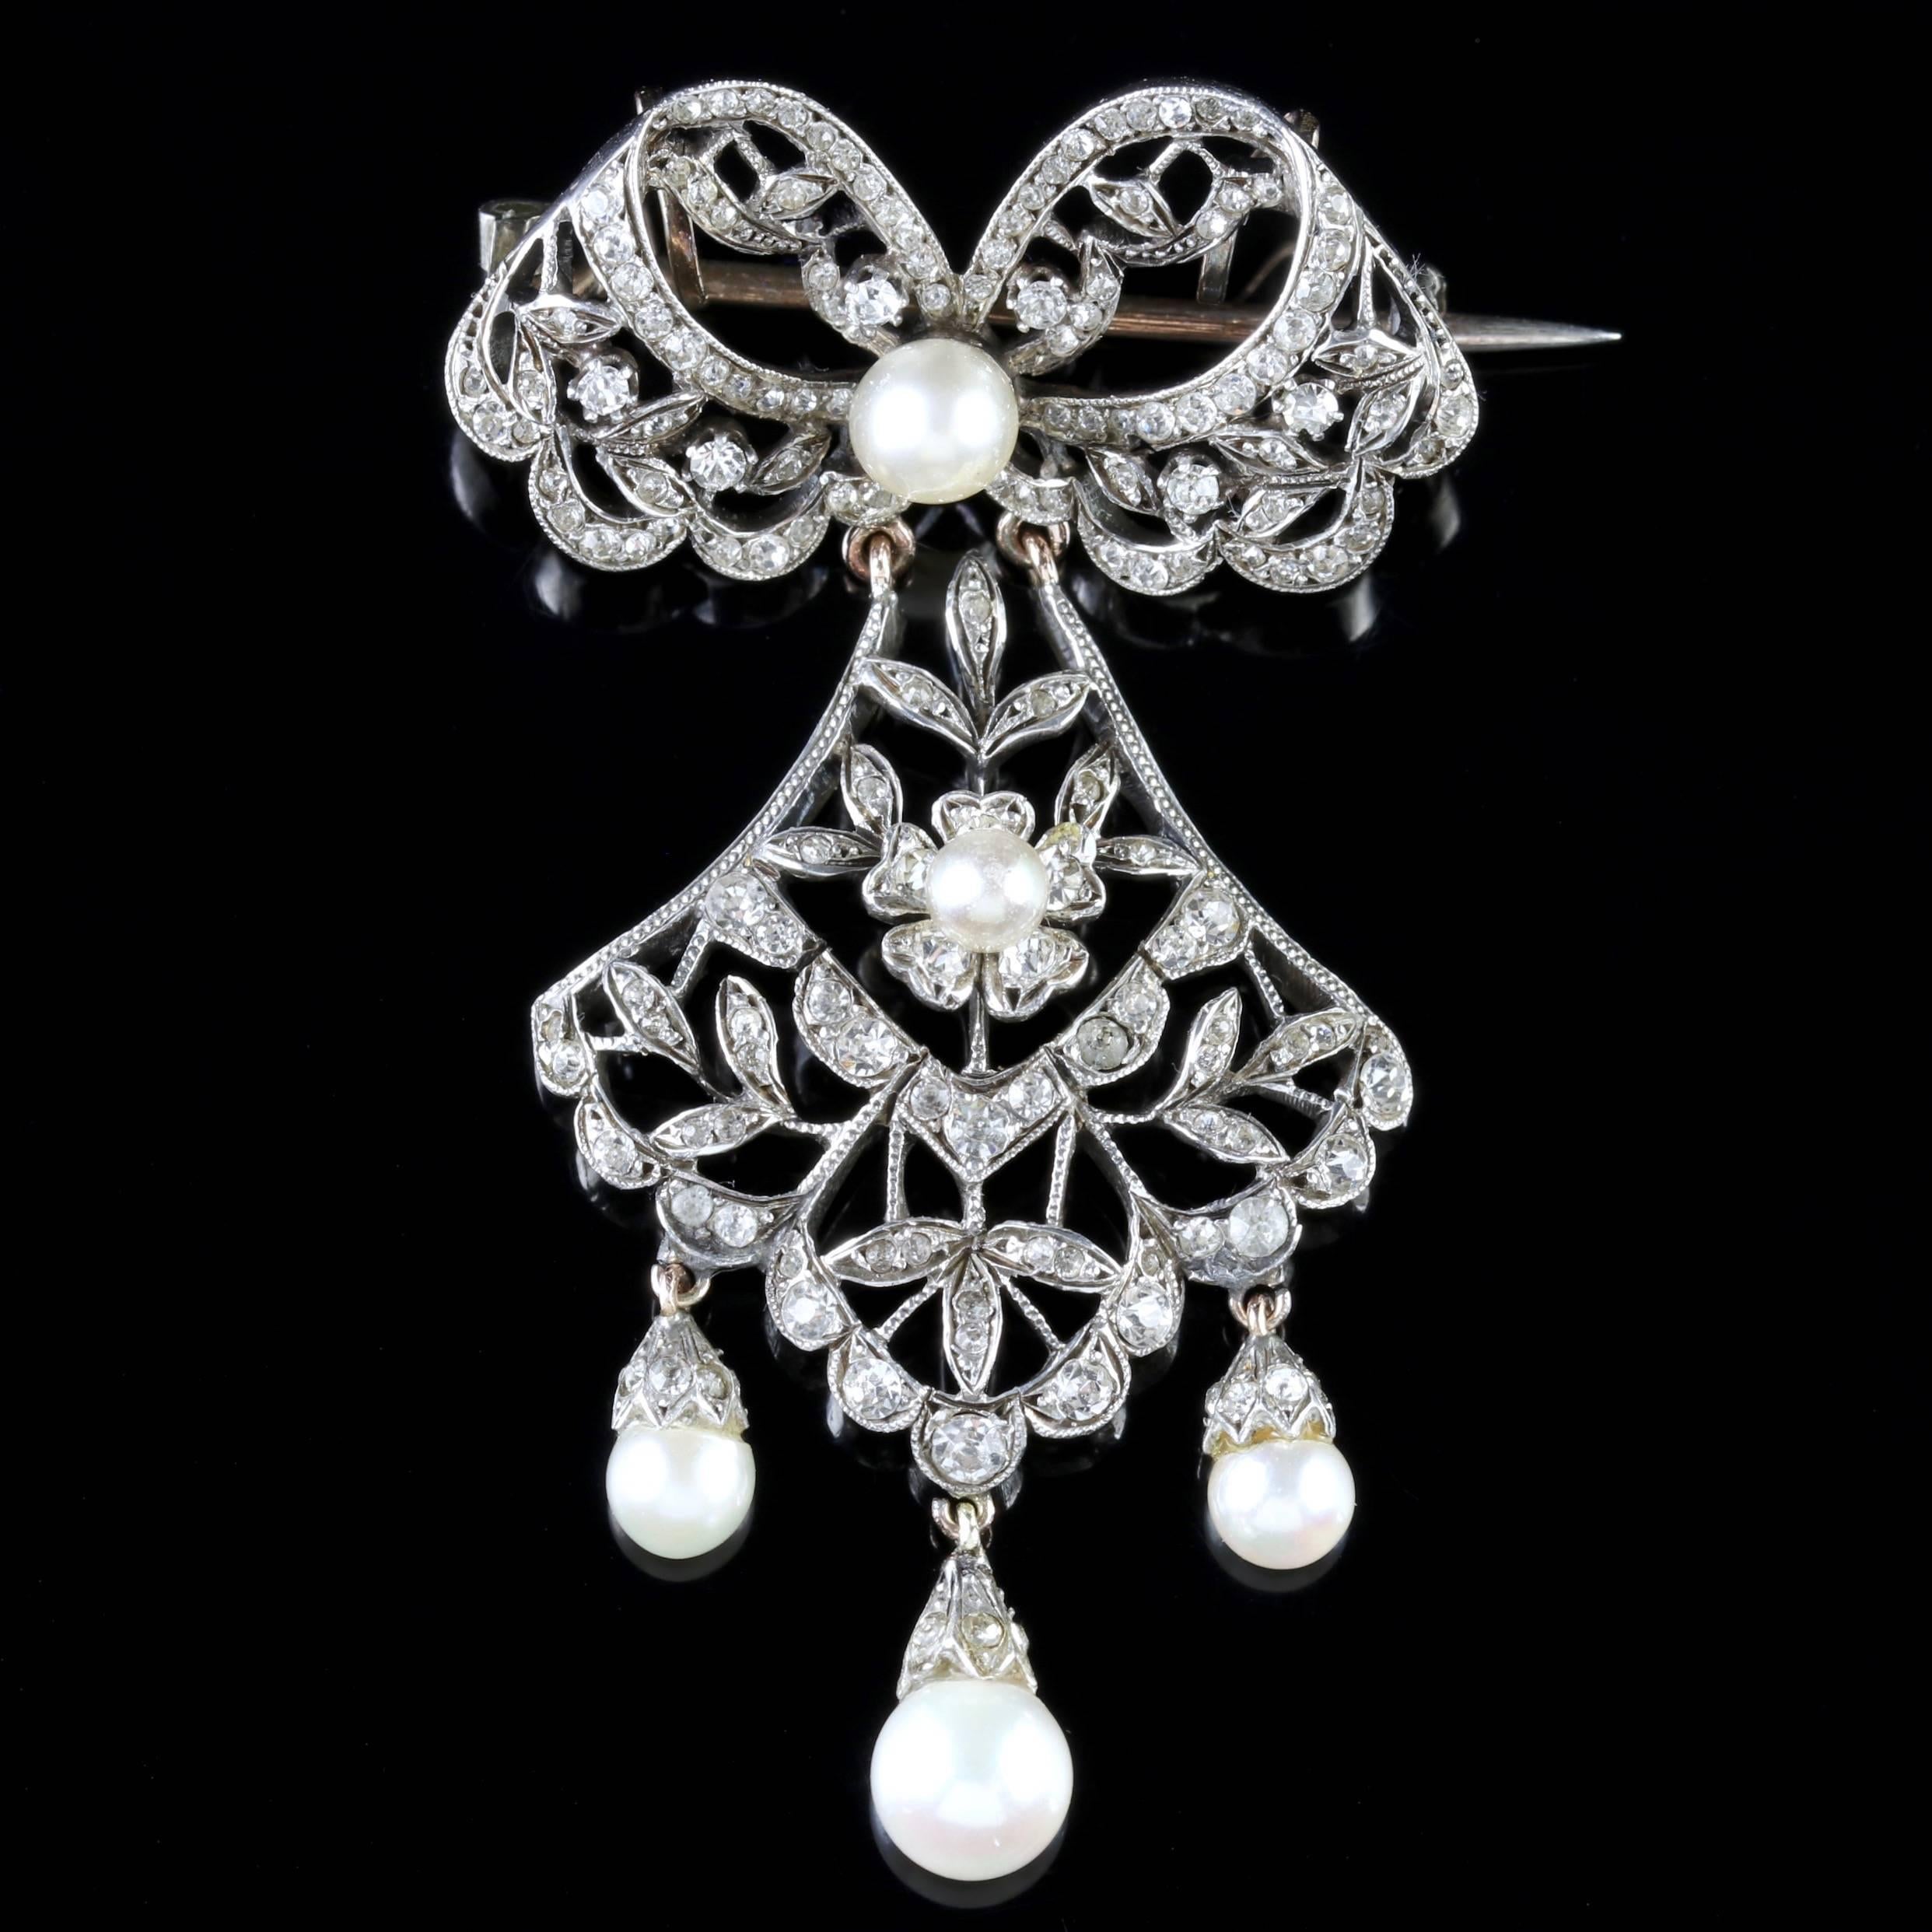 To read more please click continue reading below-

This magnificent antique French Belle Epoque Brooch is genuine Victorian Circa 1900. 

The Belle Époque, or the ‘Beautiful era’ spanned three distinct jewellery periods from 1890 -1915. This was a